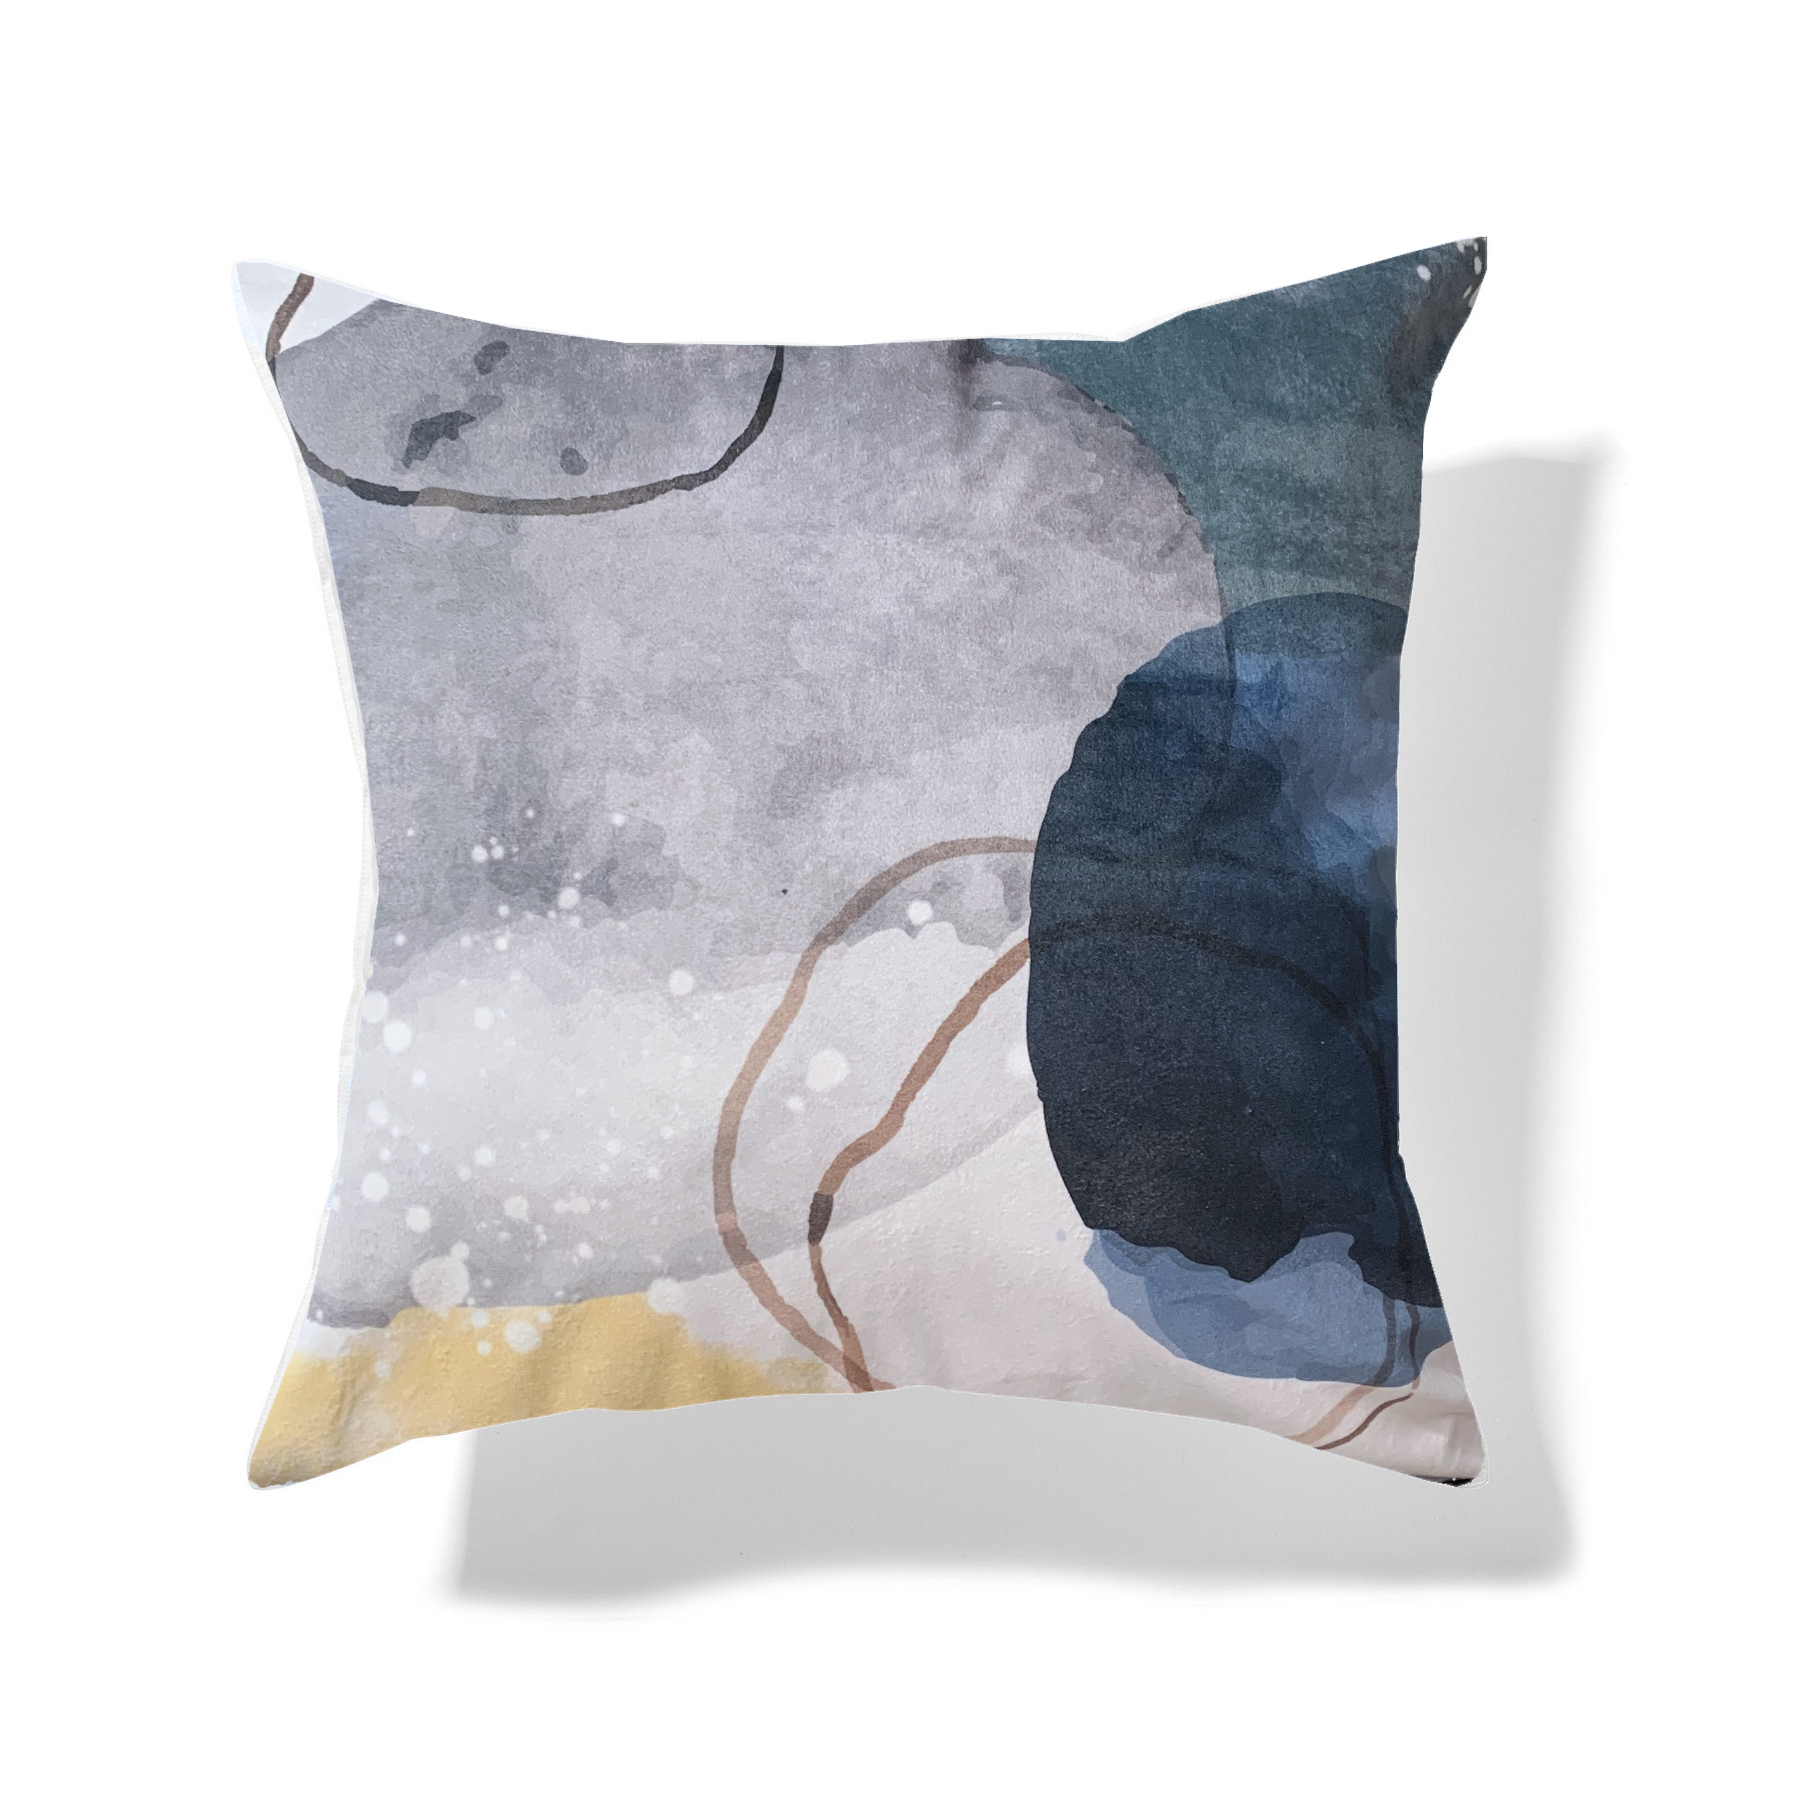 Turquoise Watercolor Cushion